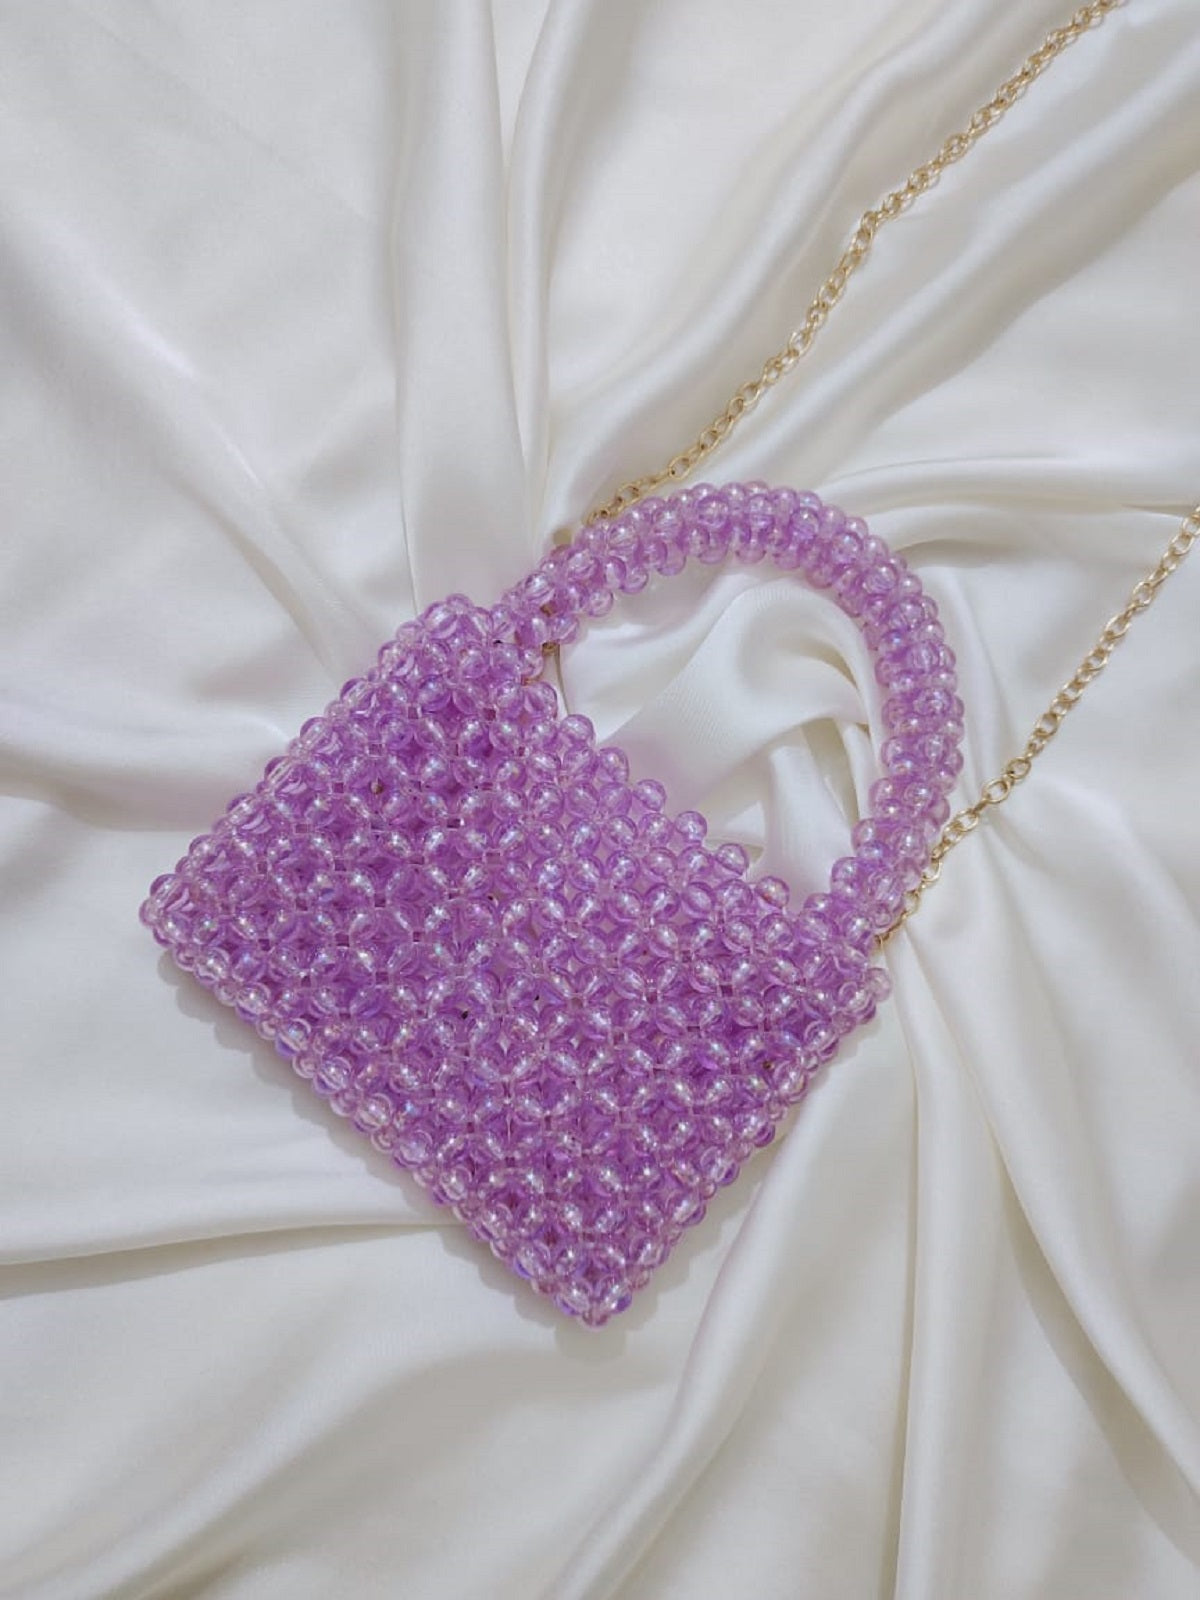 Mini Beaded Bag with Dual Straps: A Harmony of Delicate Elegance and Versatility